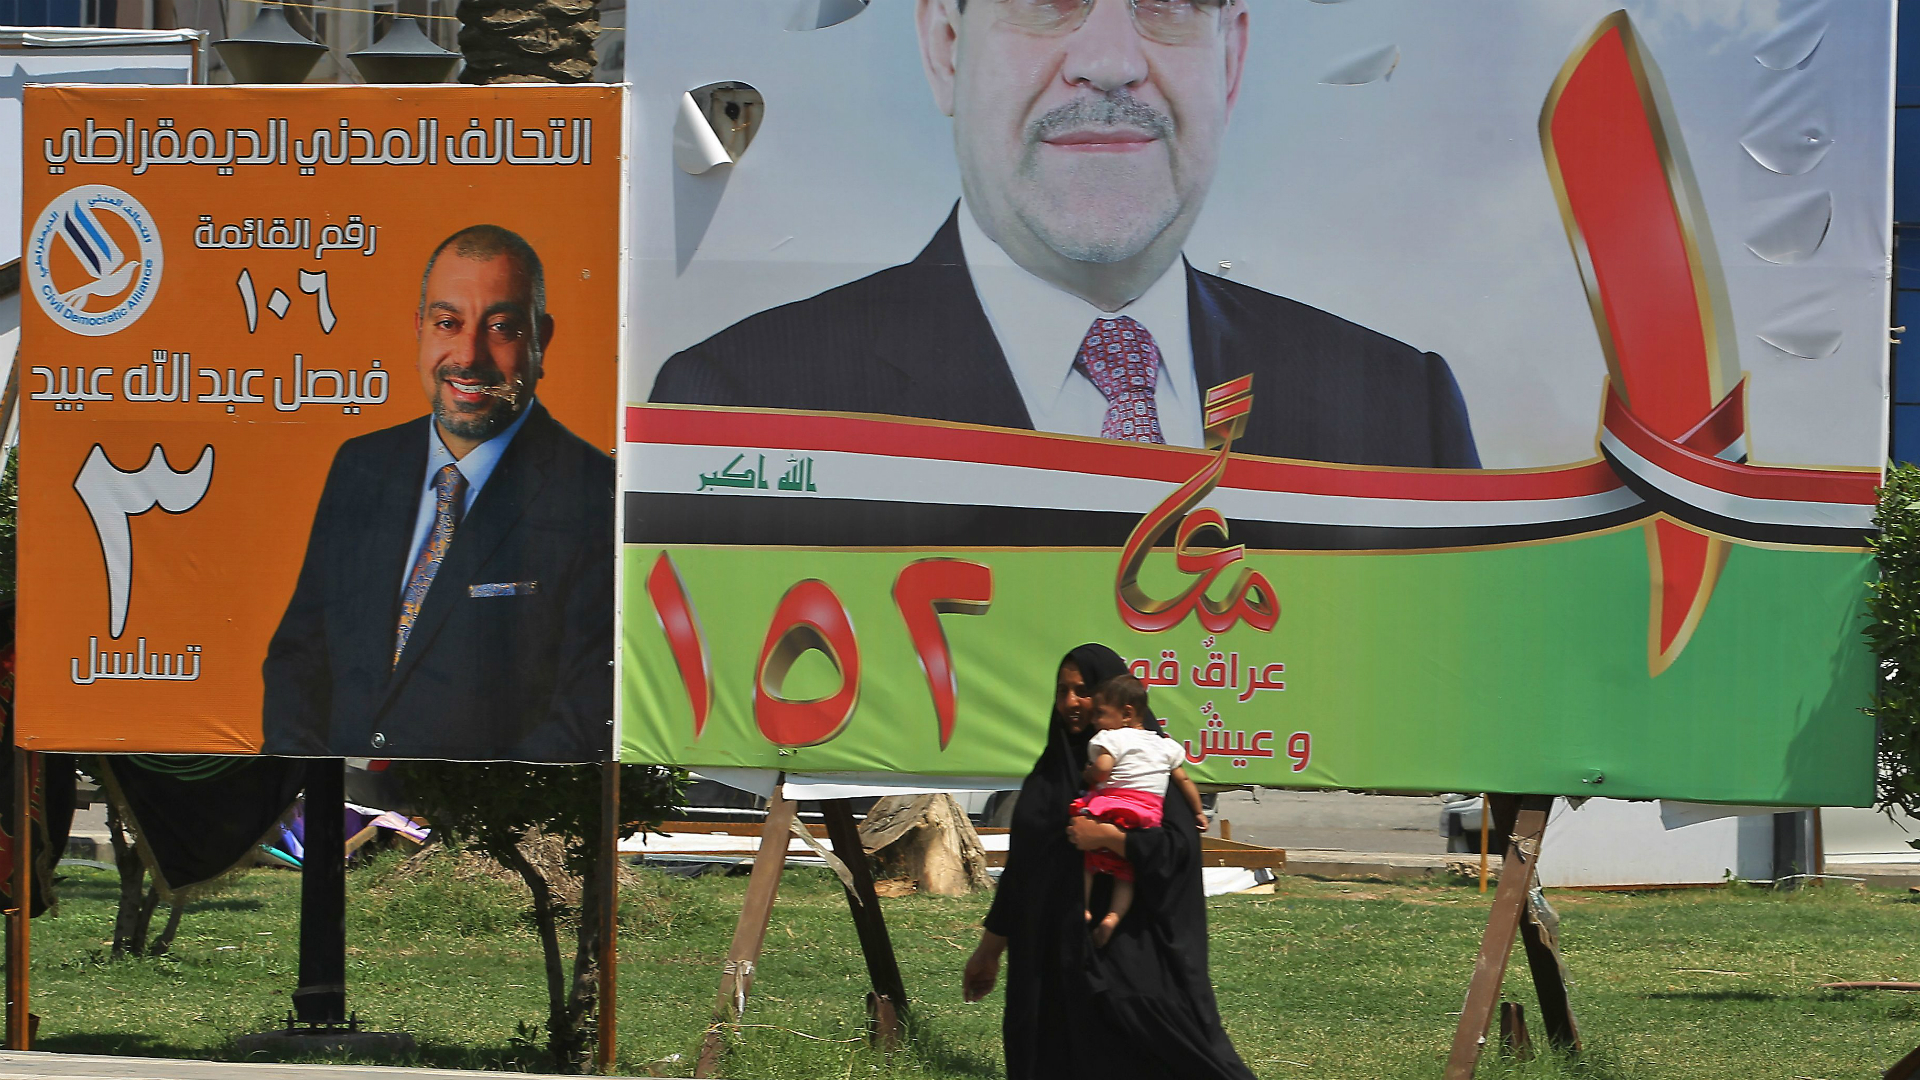 Election campaigning in Iraq (Getty)